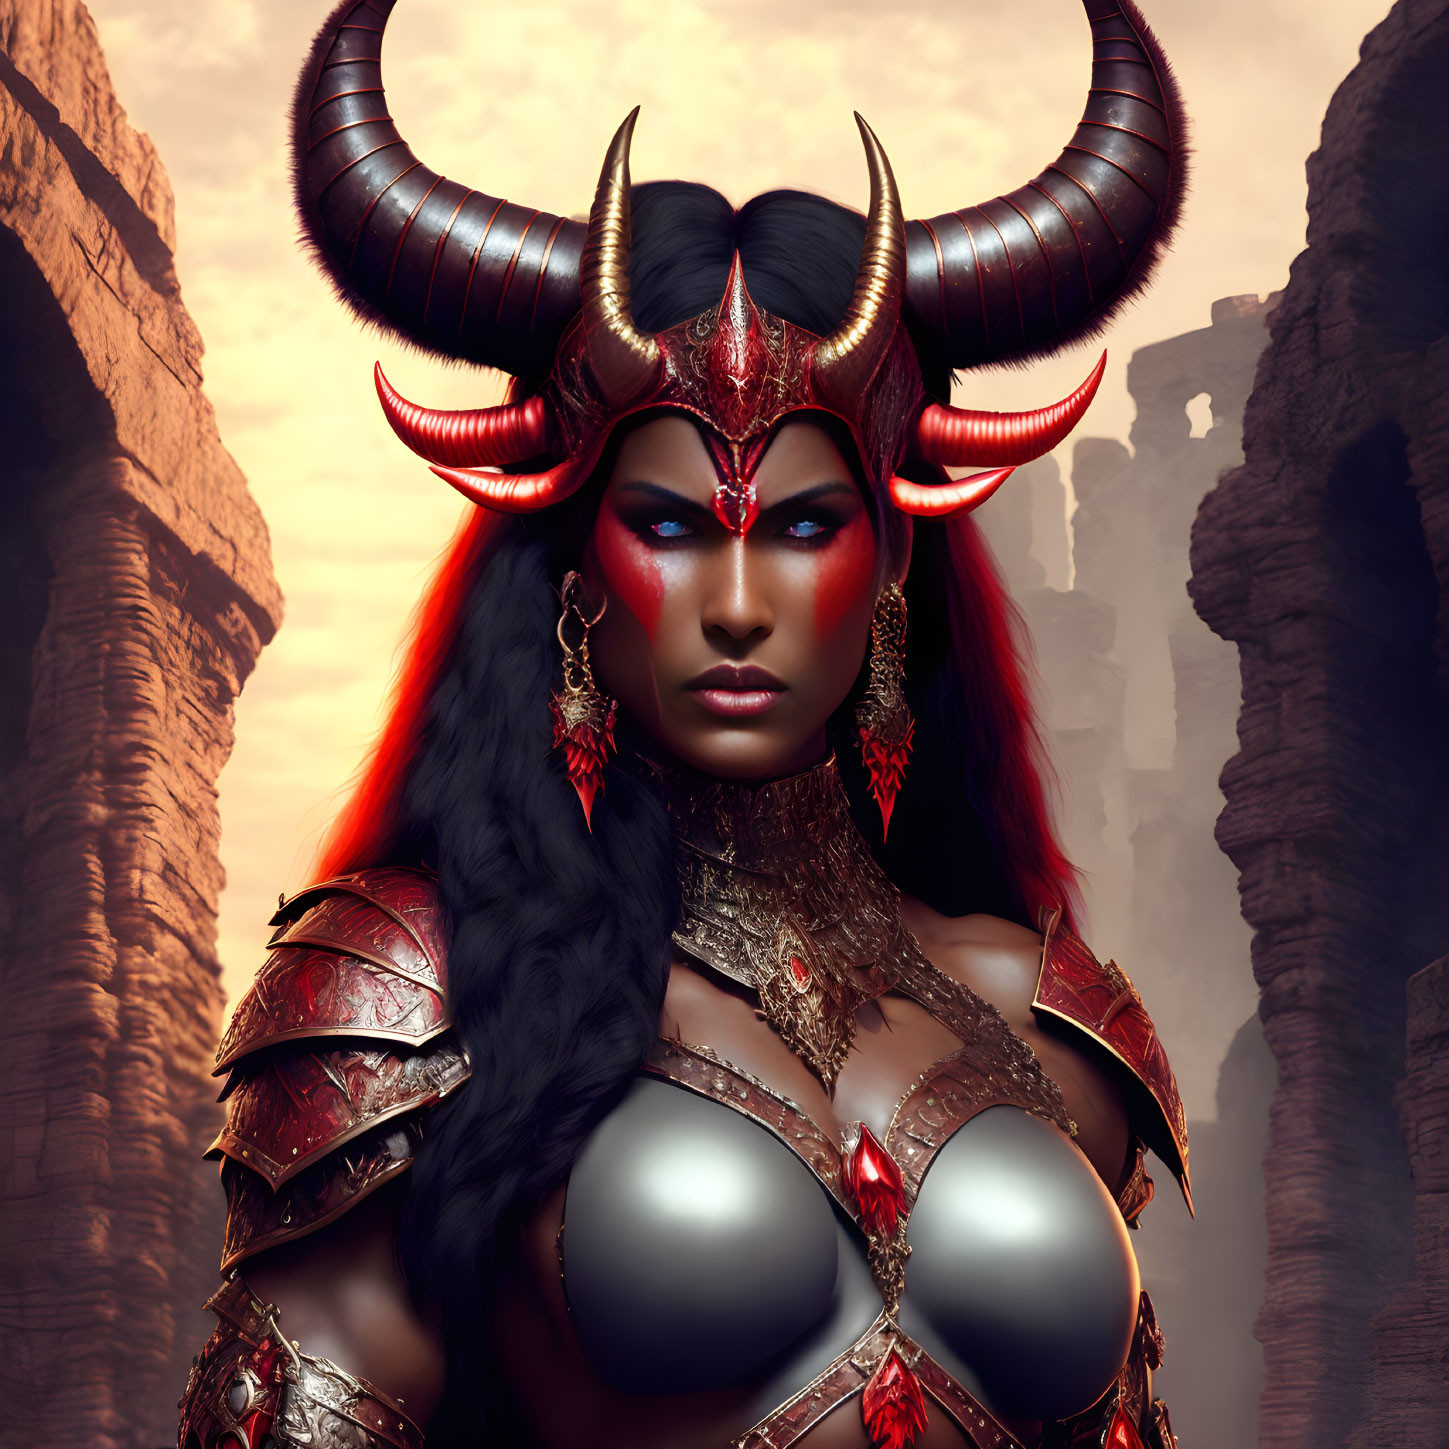 Red-skinned warrior woman with black horns and intricate armor in rocky setting